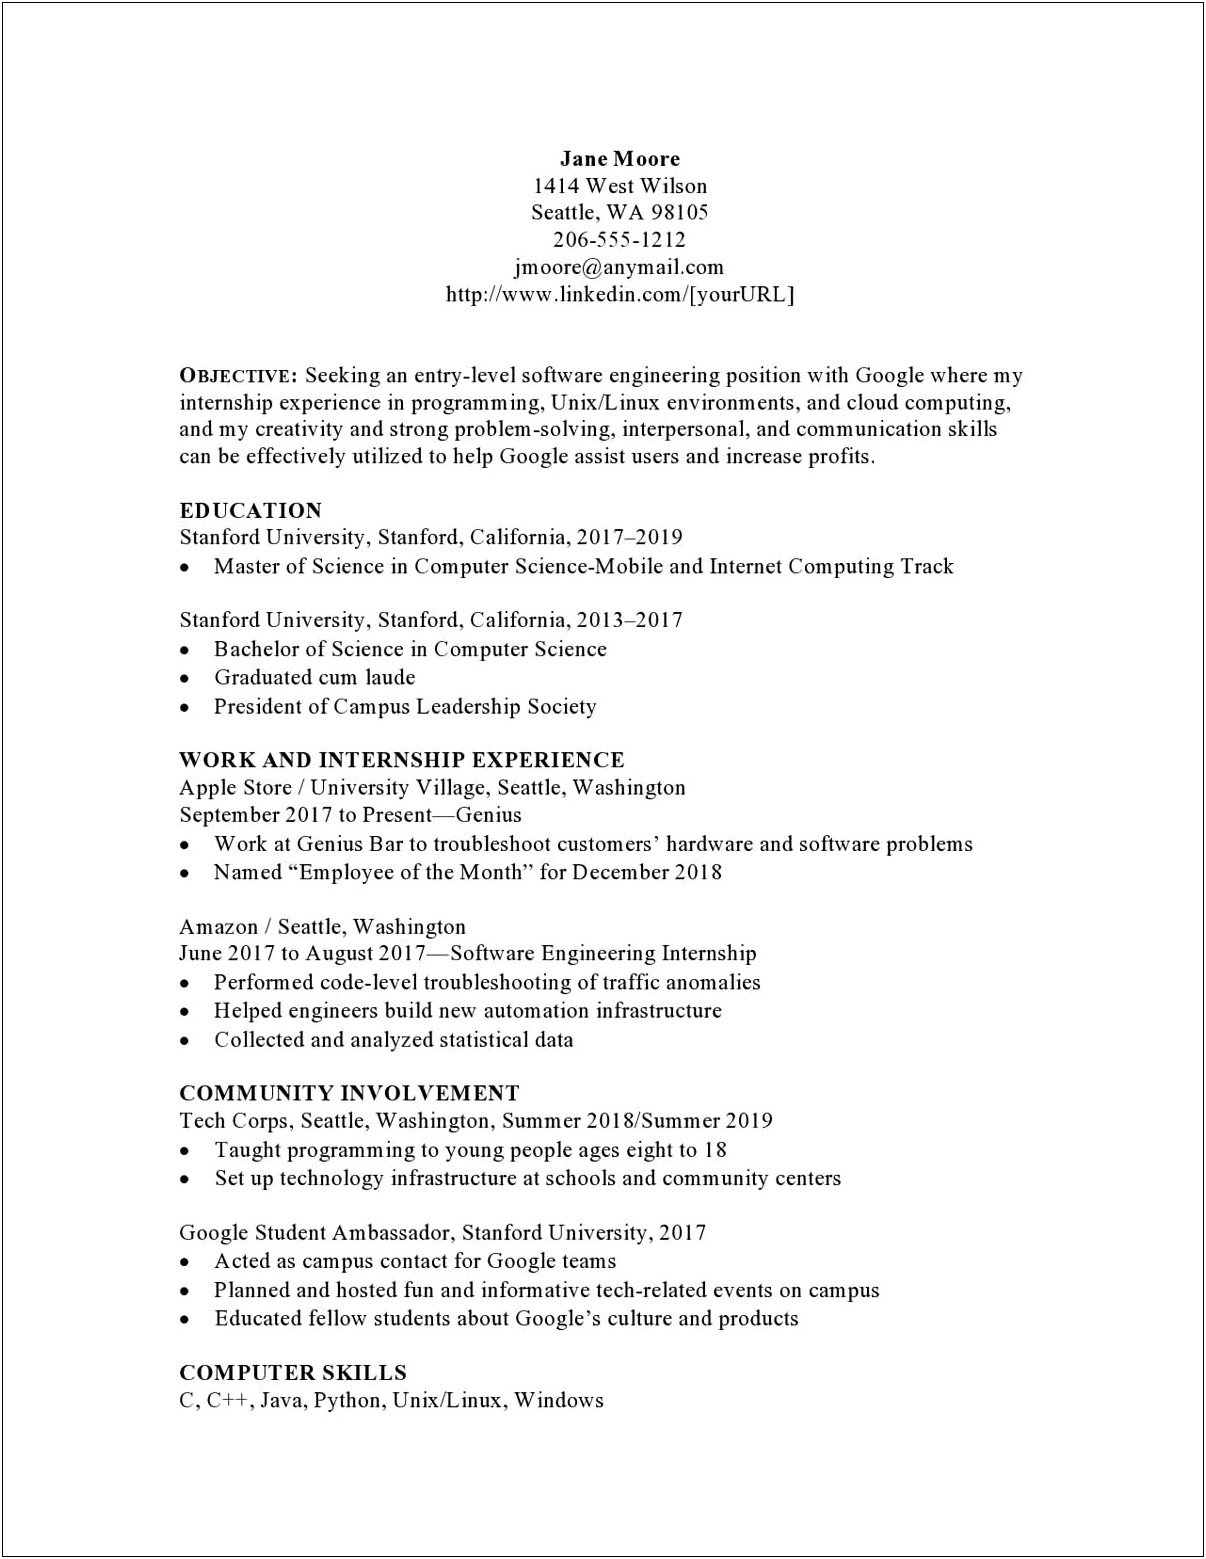 Resume Samples For Entry Level Engineers